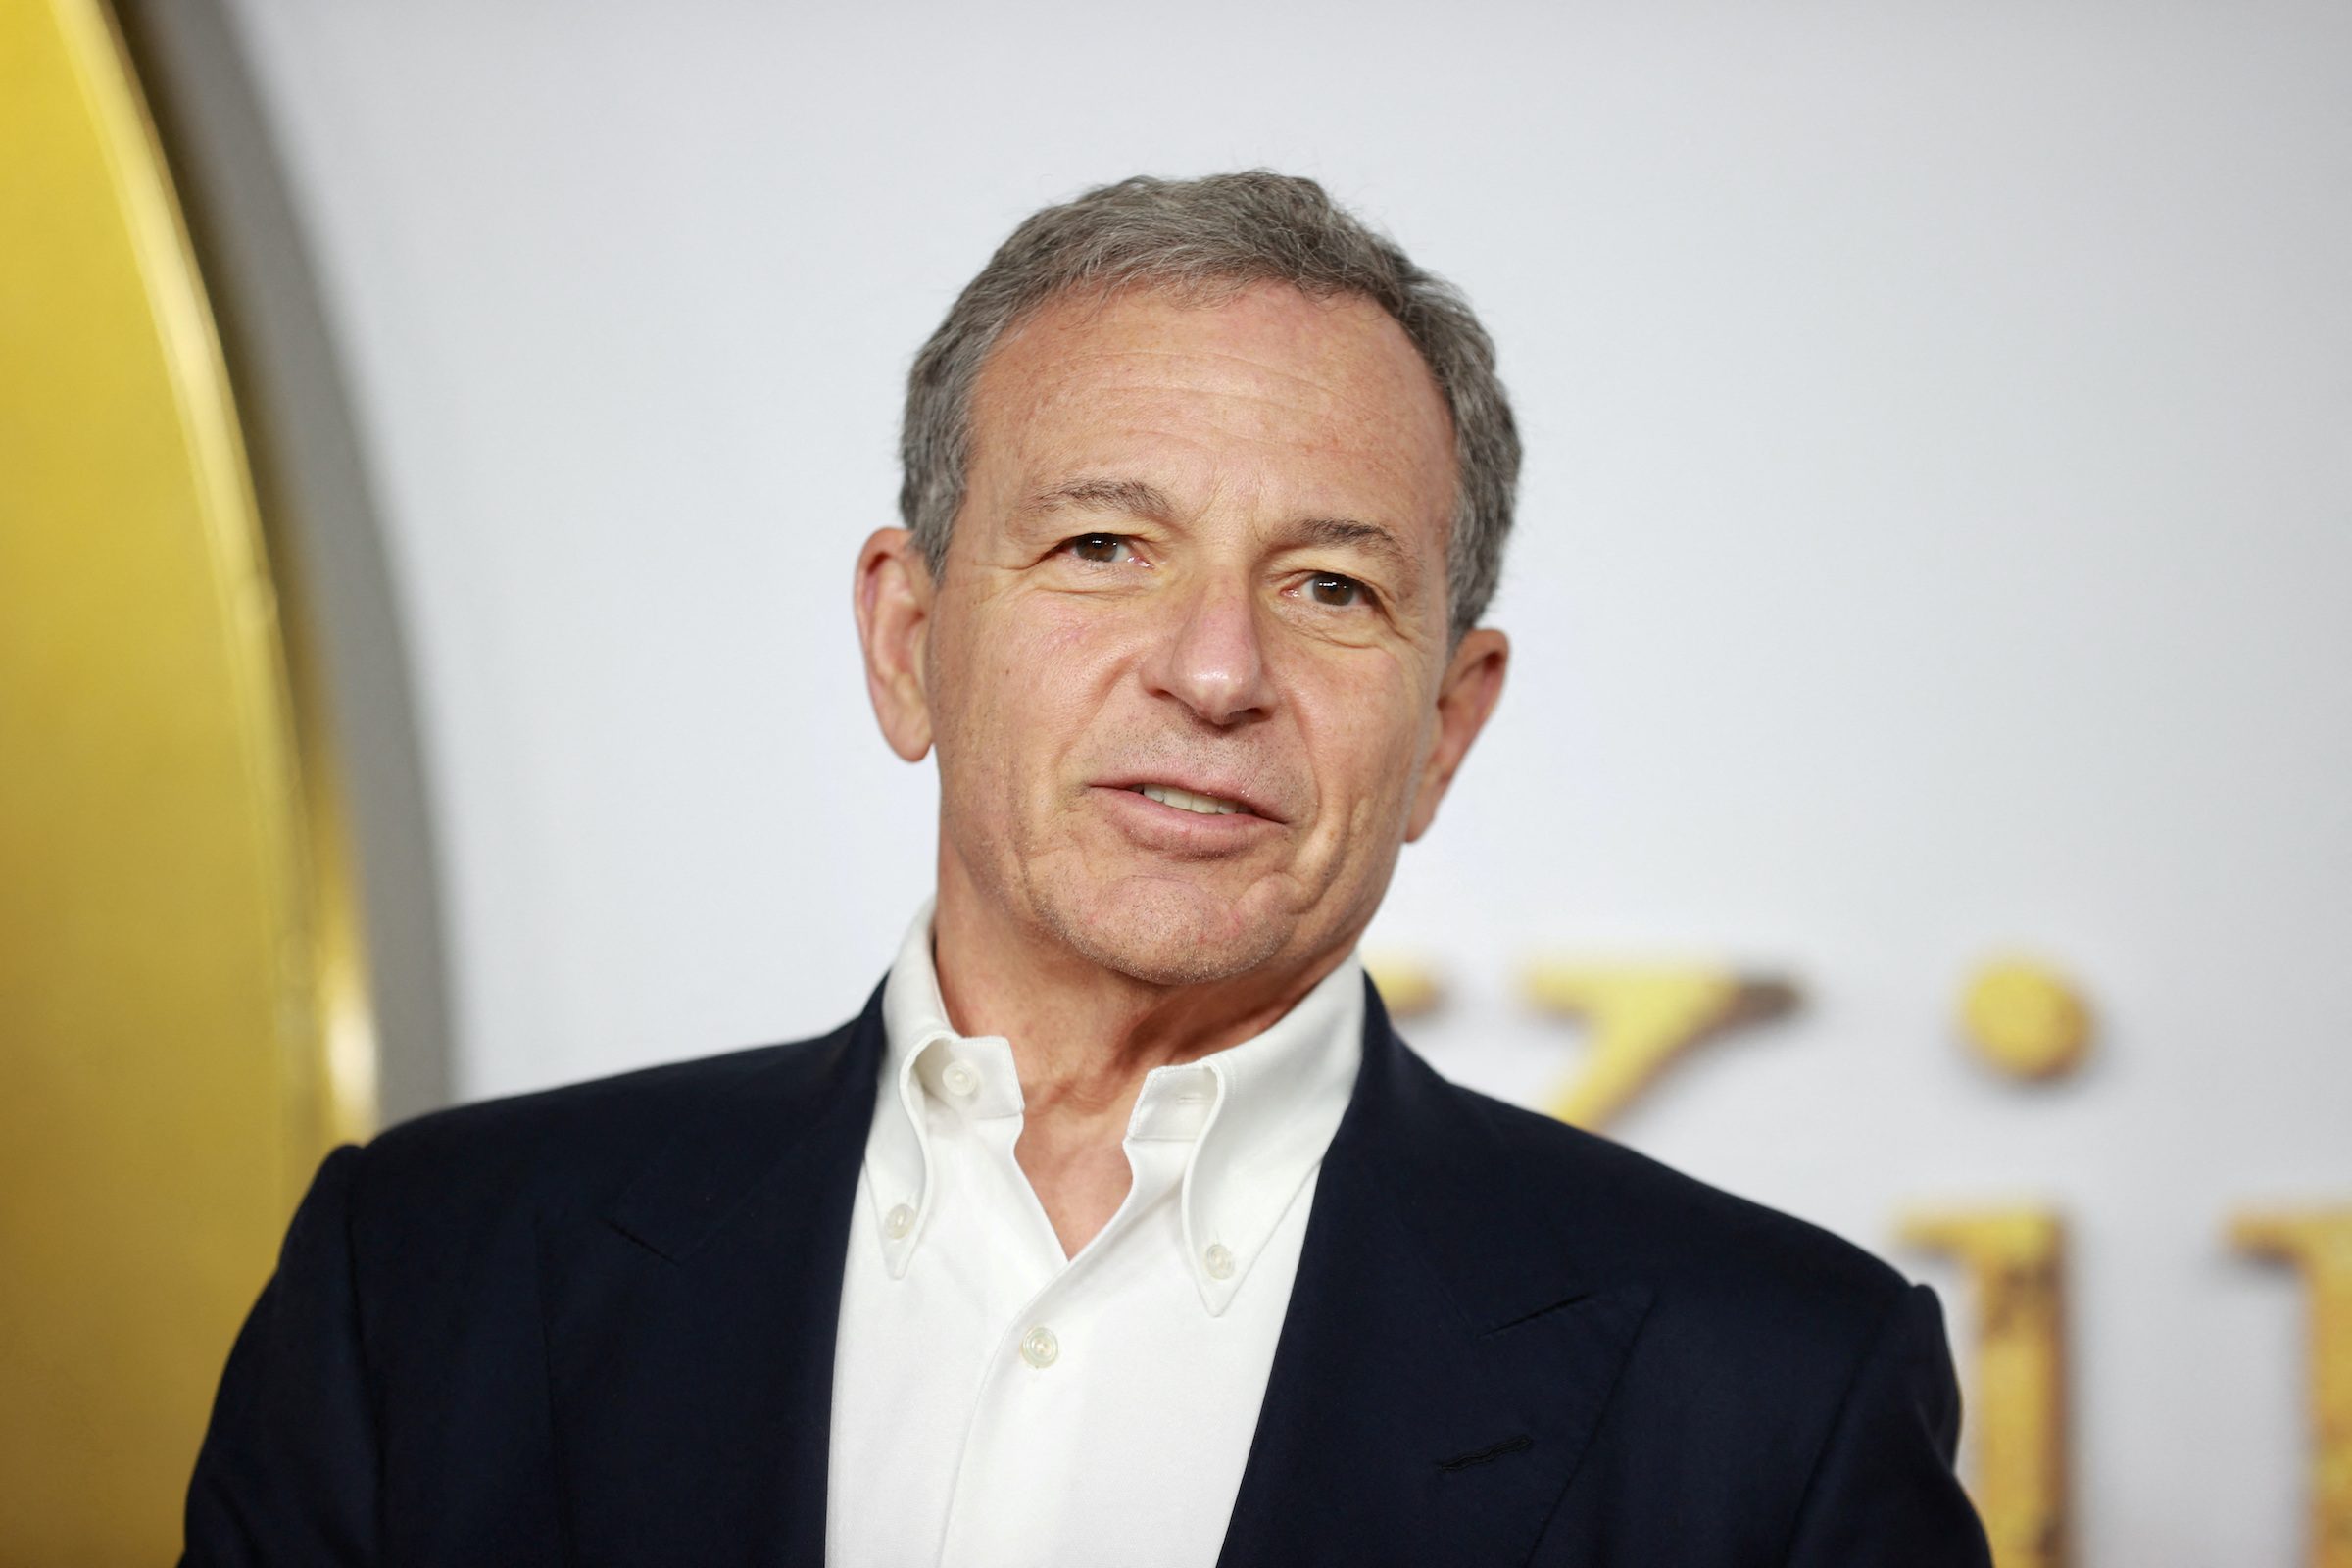 At Disney, Iger confronts succession problem he helped create